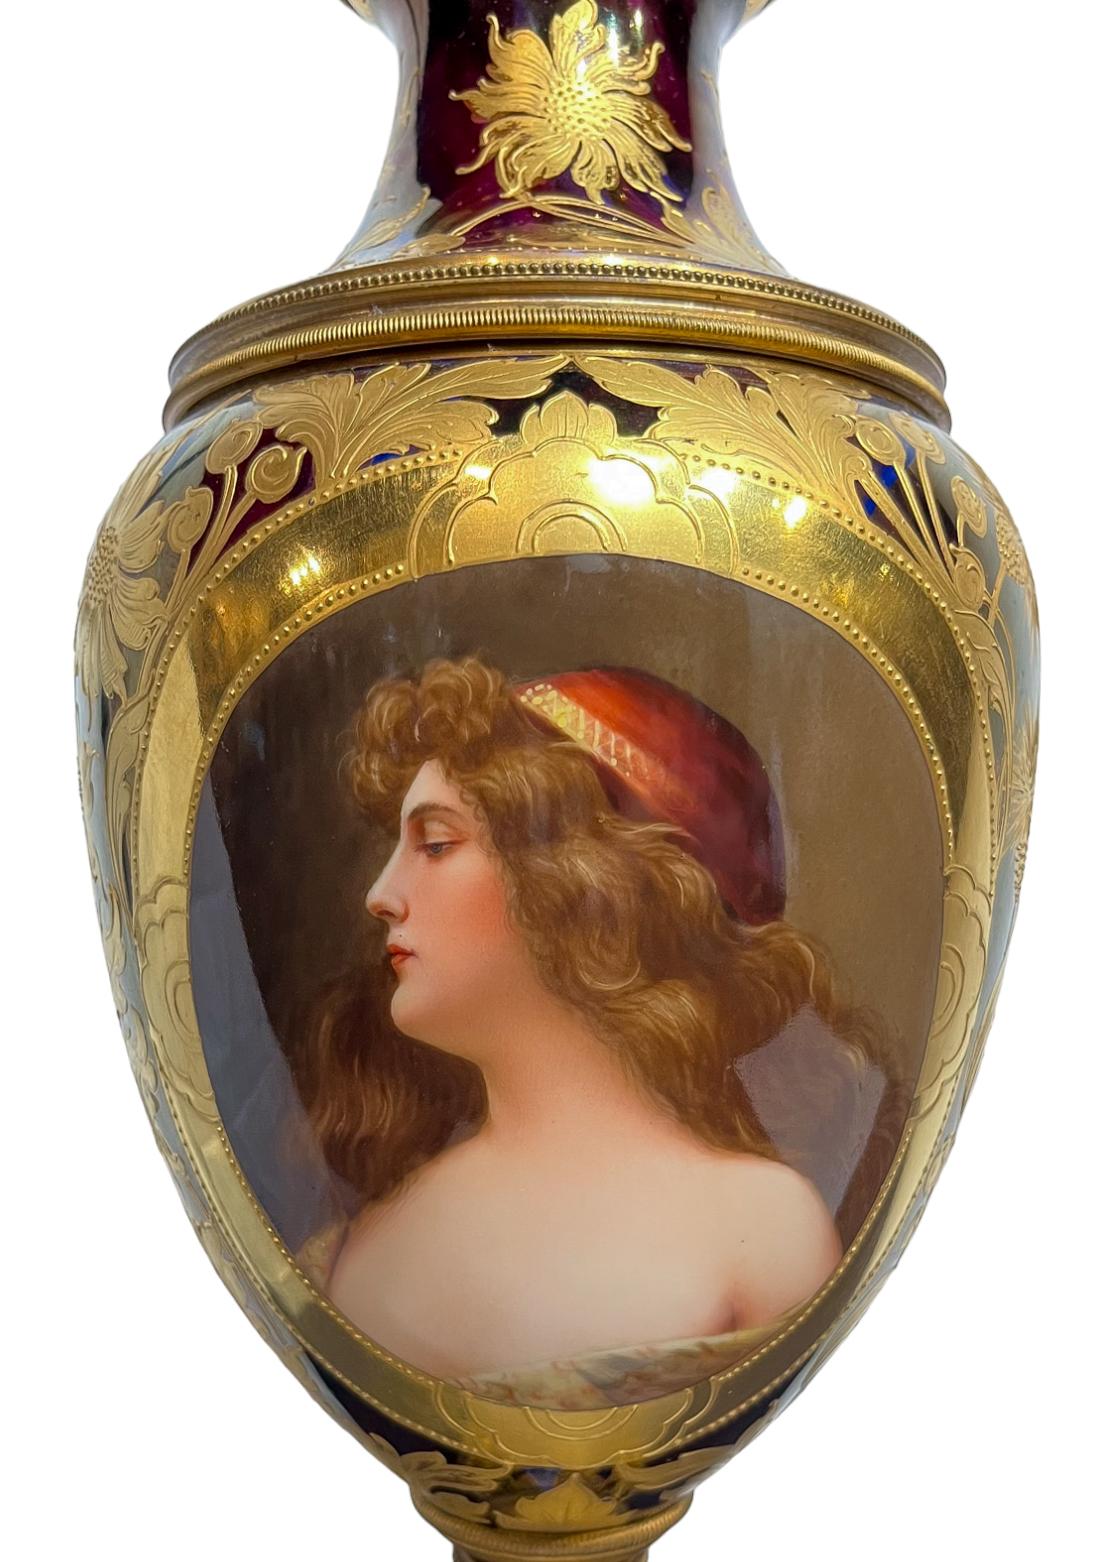 An elegant Royal Vienna porcelain vase with painted portrait of a beautiful woman on one side and beautiful gold gilt flowers on the reverse.

Origin: Austrian
Date: 19th century
Dimension: 18 x 6 in 